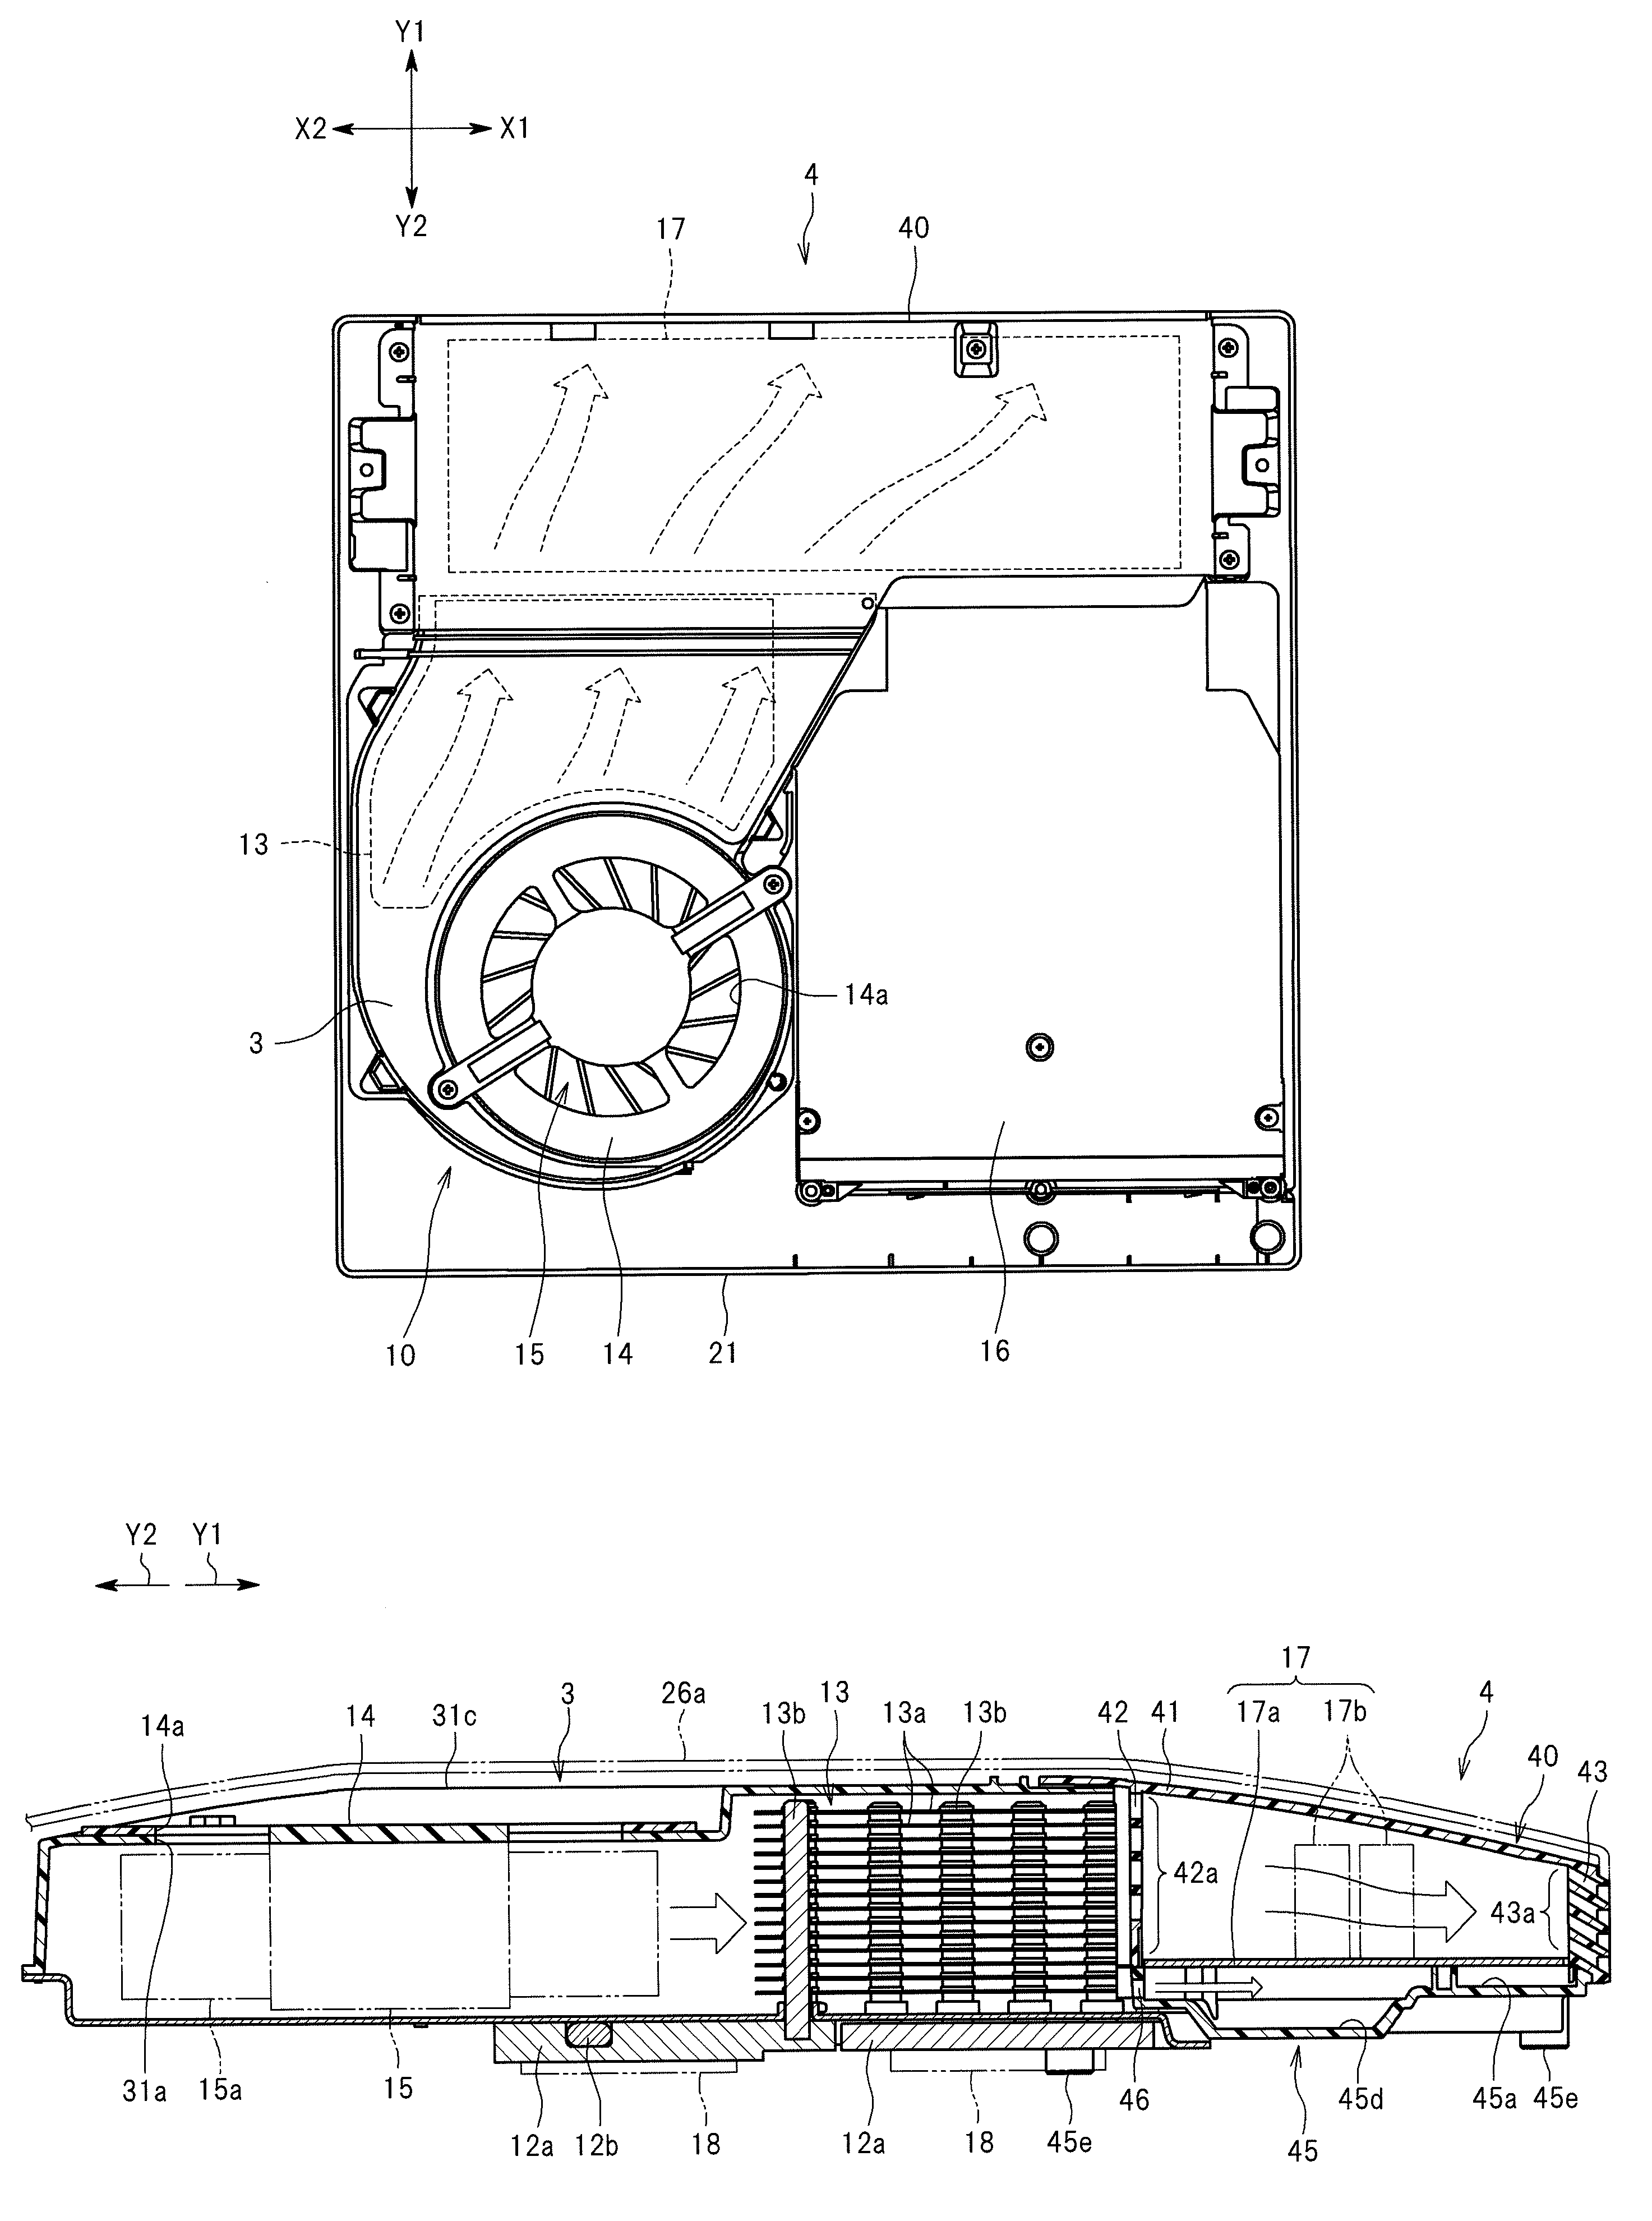 Electronic apparatus including a cooling unit and a wall member